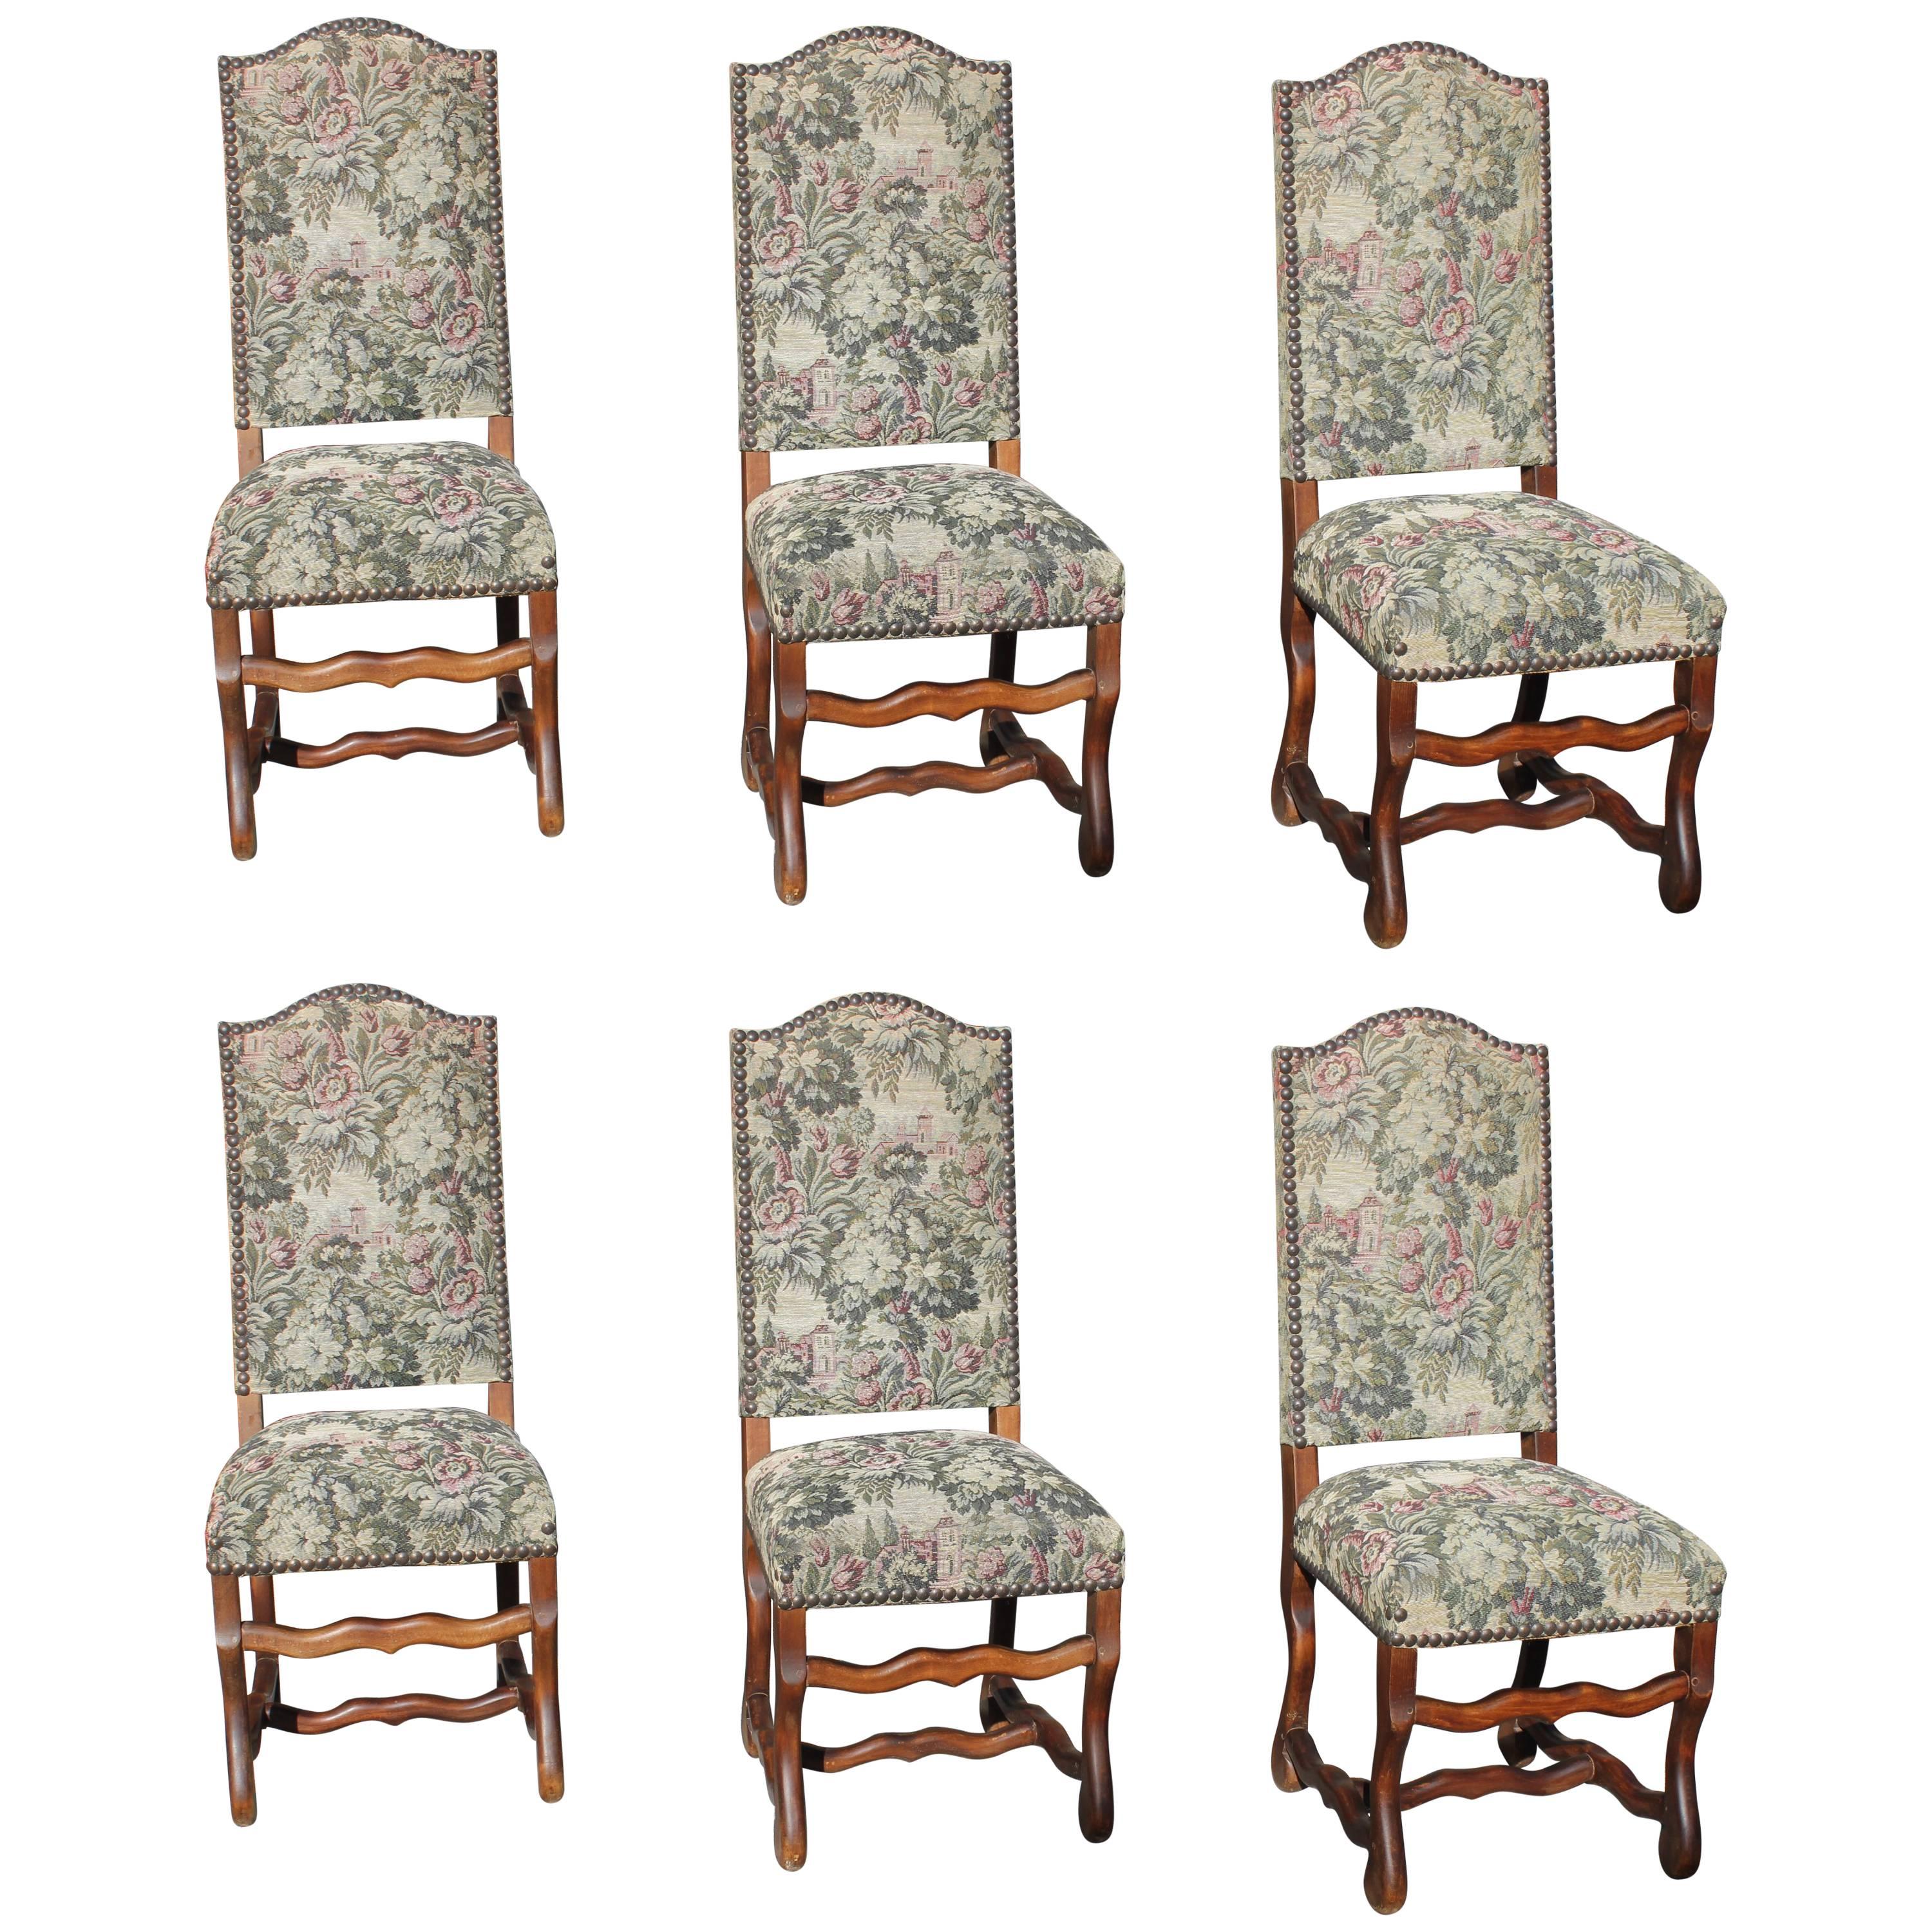 Beautiful Set of Six Louis XIII Style Os De Mouton Dining Chairs, circa 1880